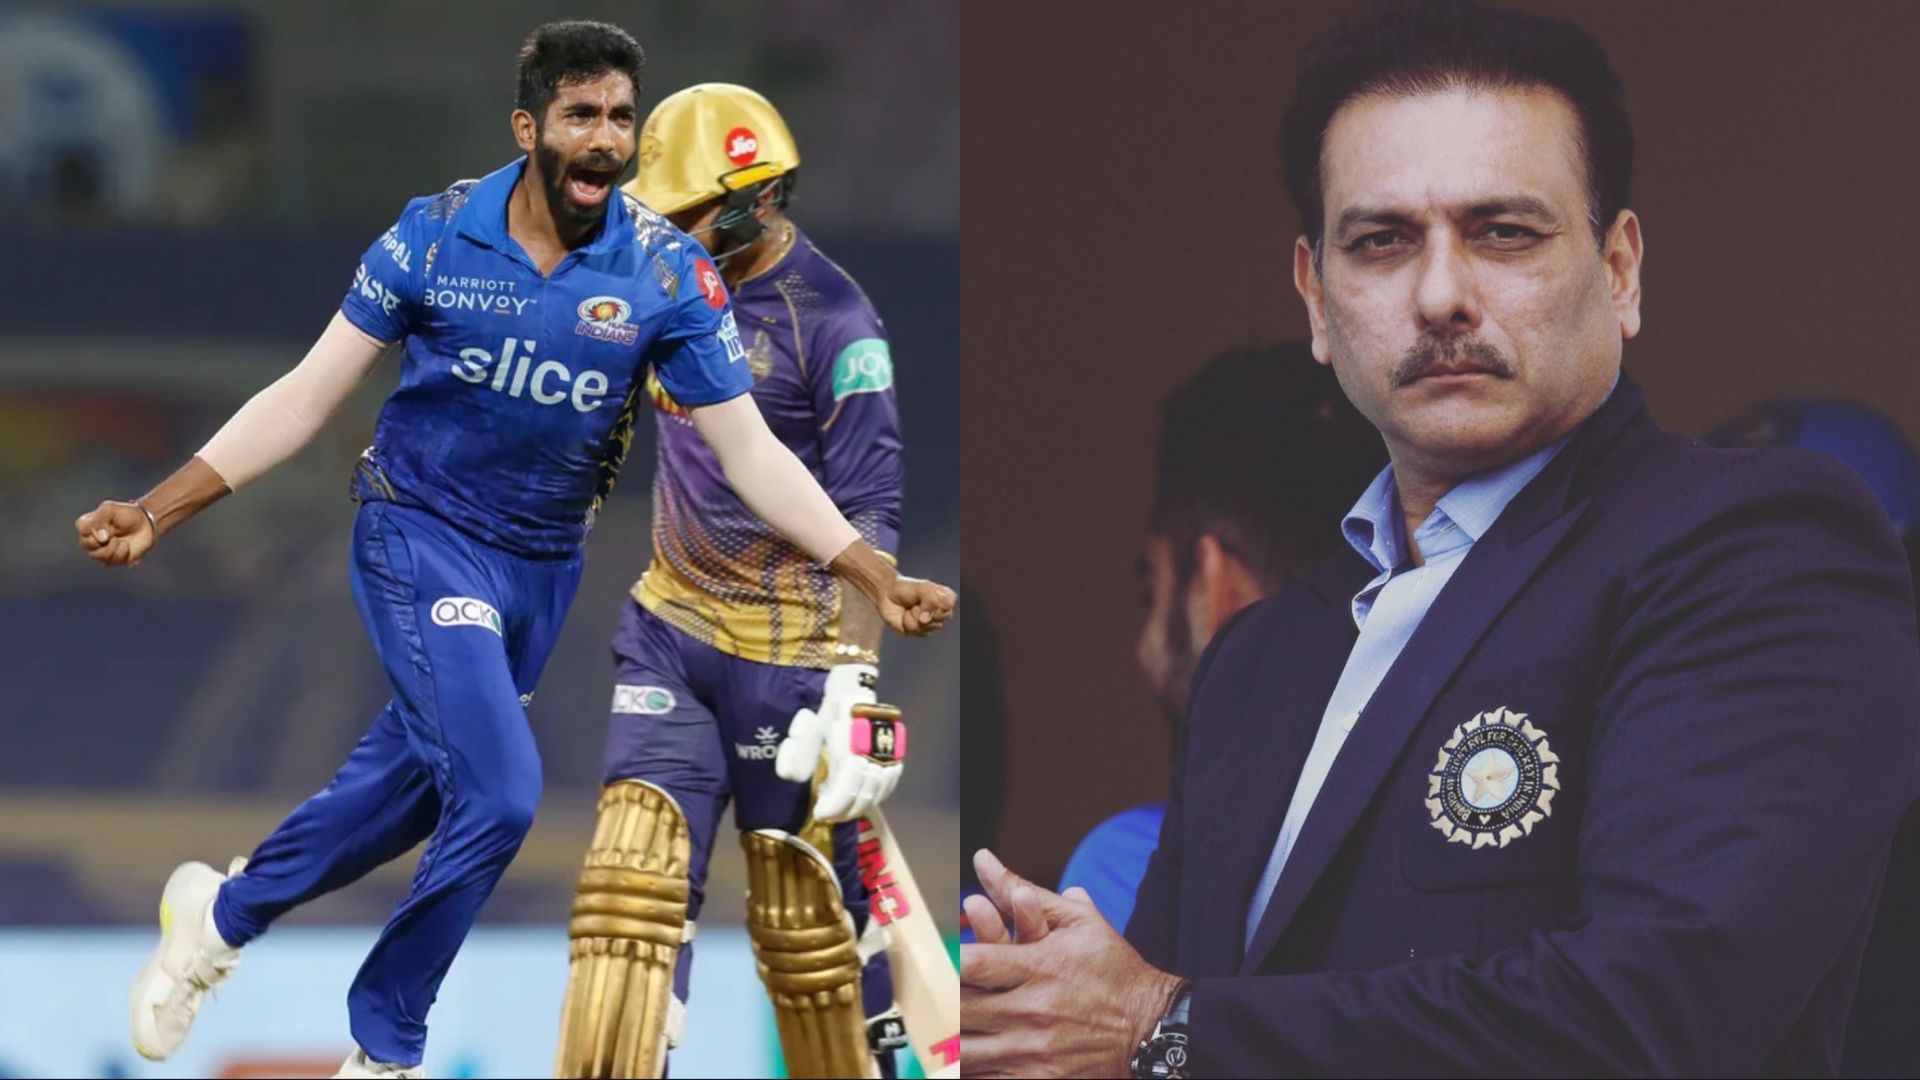 Former Indian head coach Ravi Shastri heaped praise on Jasprit Bumrah for his magnificent spell